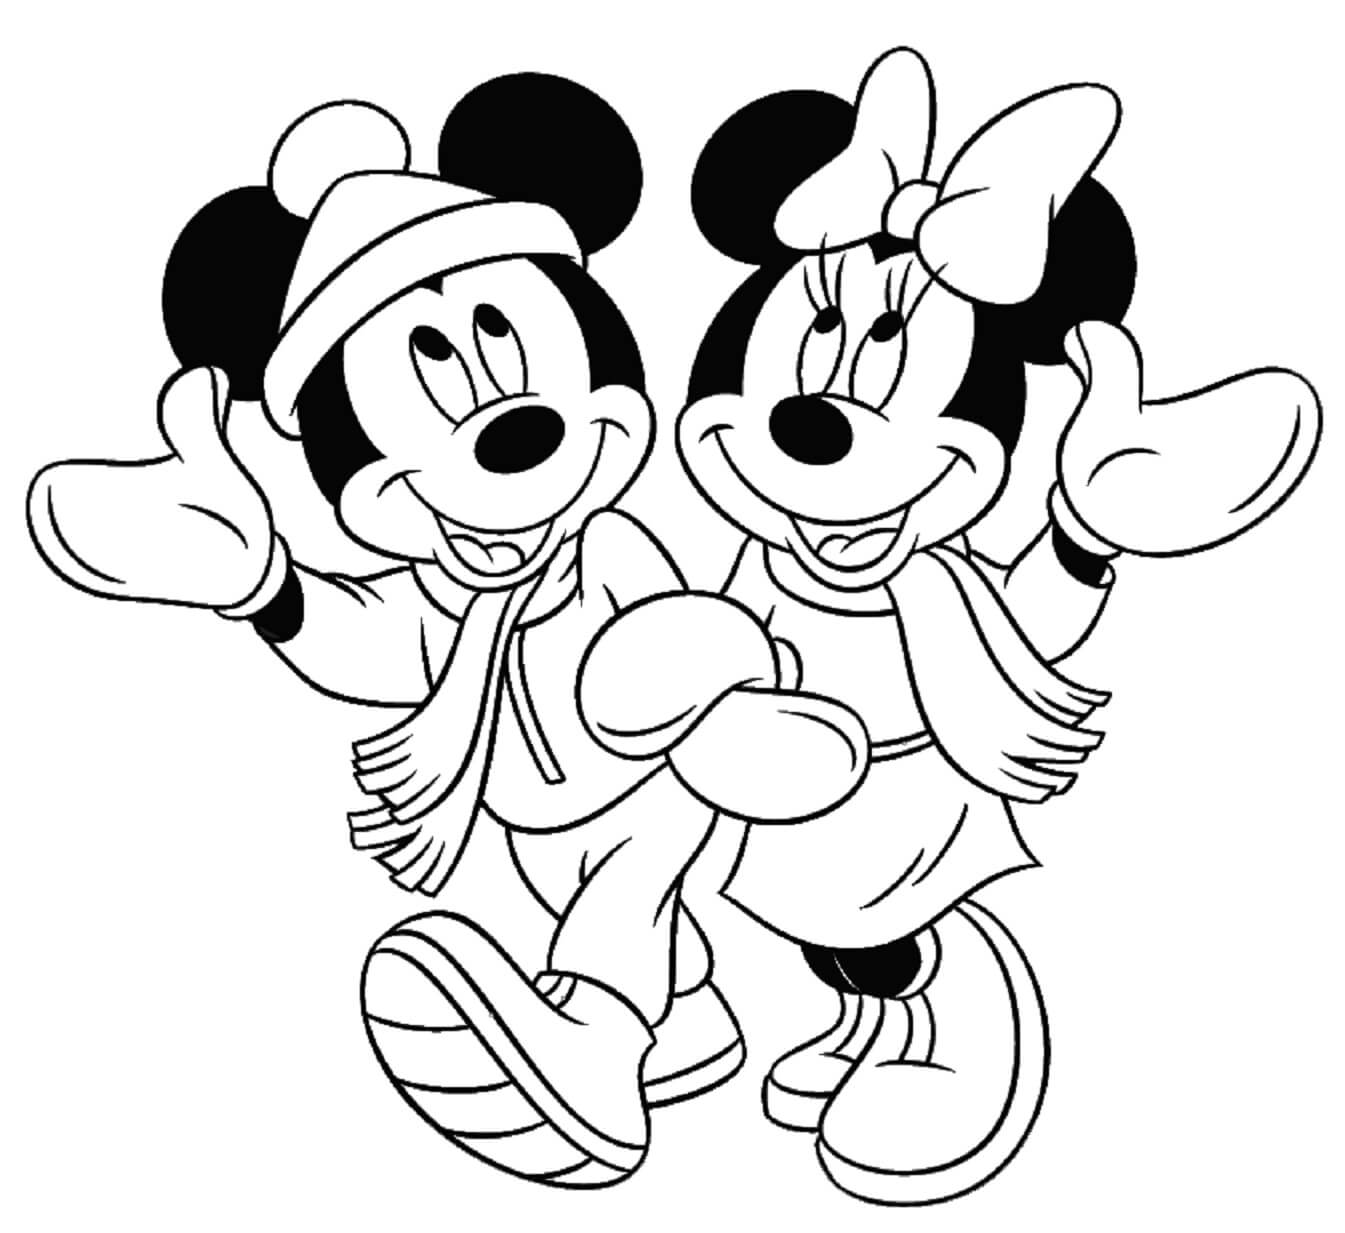 Coloriage Mickey avec Minnie Mouse